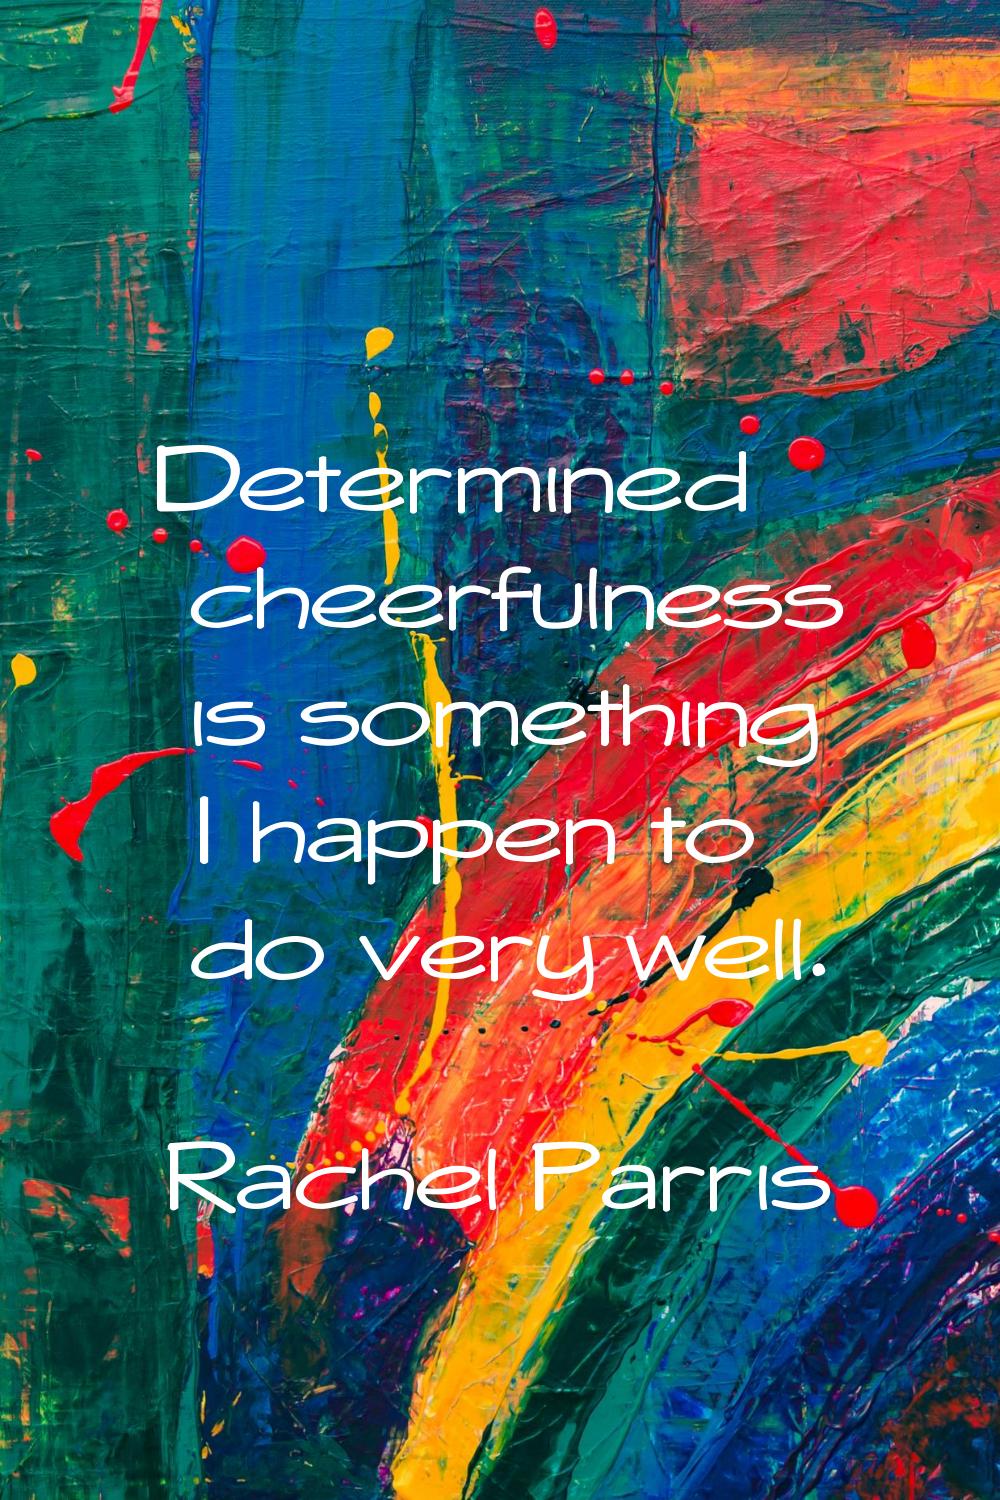 Determined cheerfulness is something I happen to do very well.